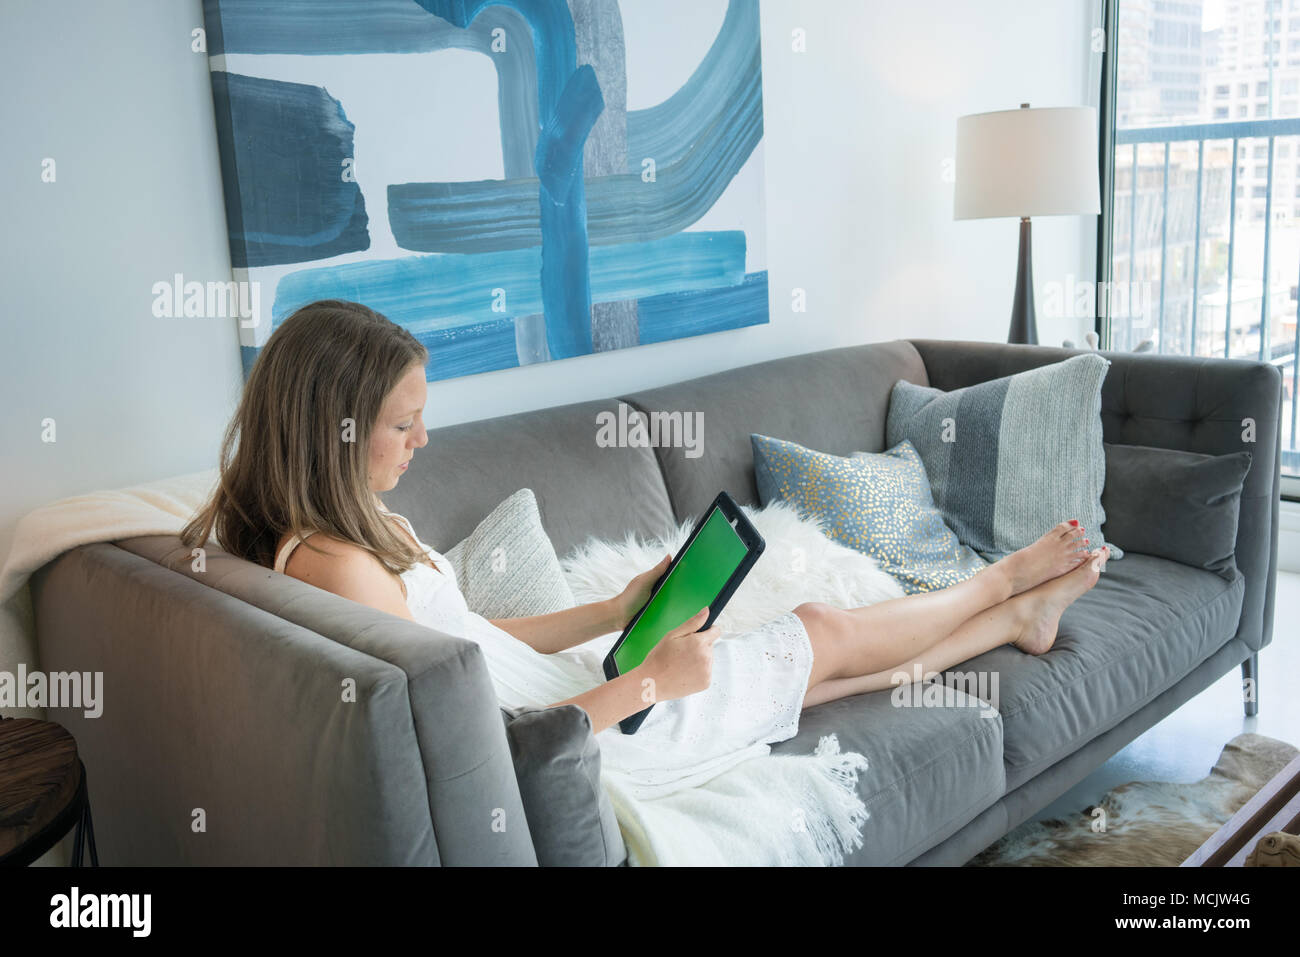 Young woman using digital tablet while lying on sofa in living room Banque D'Images